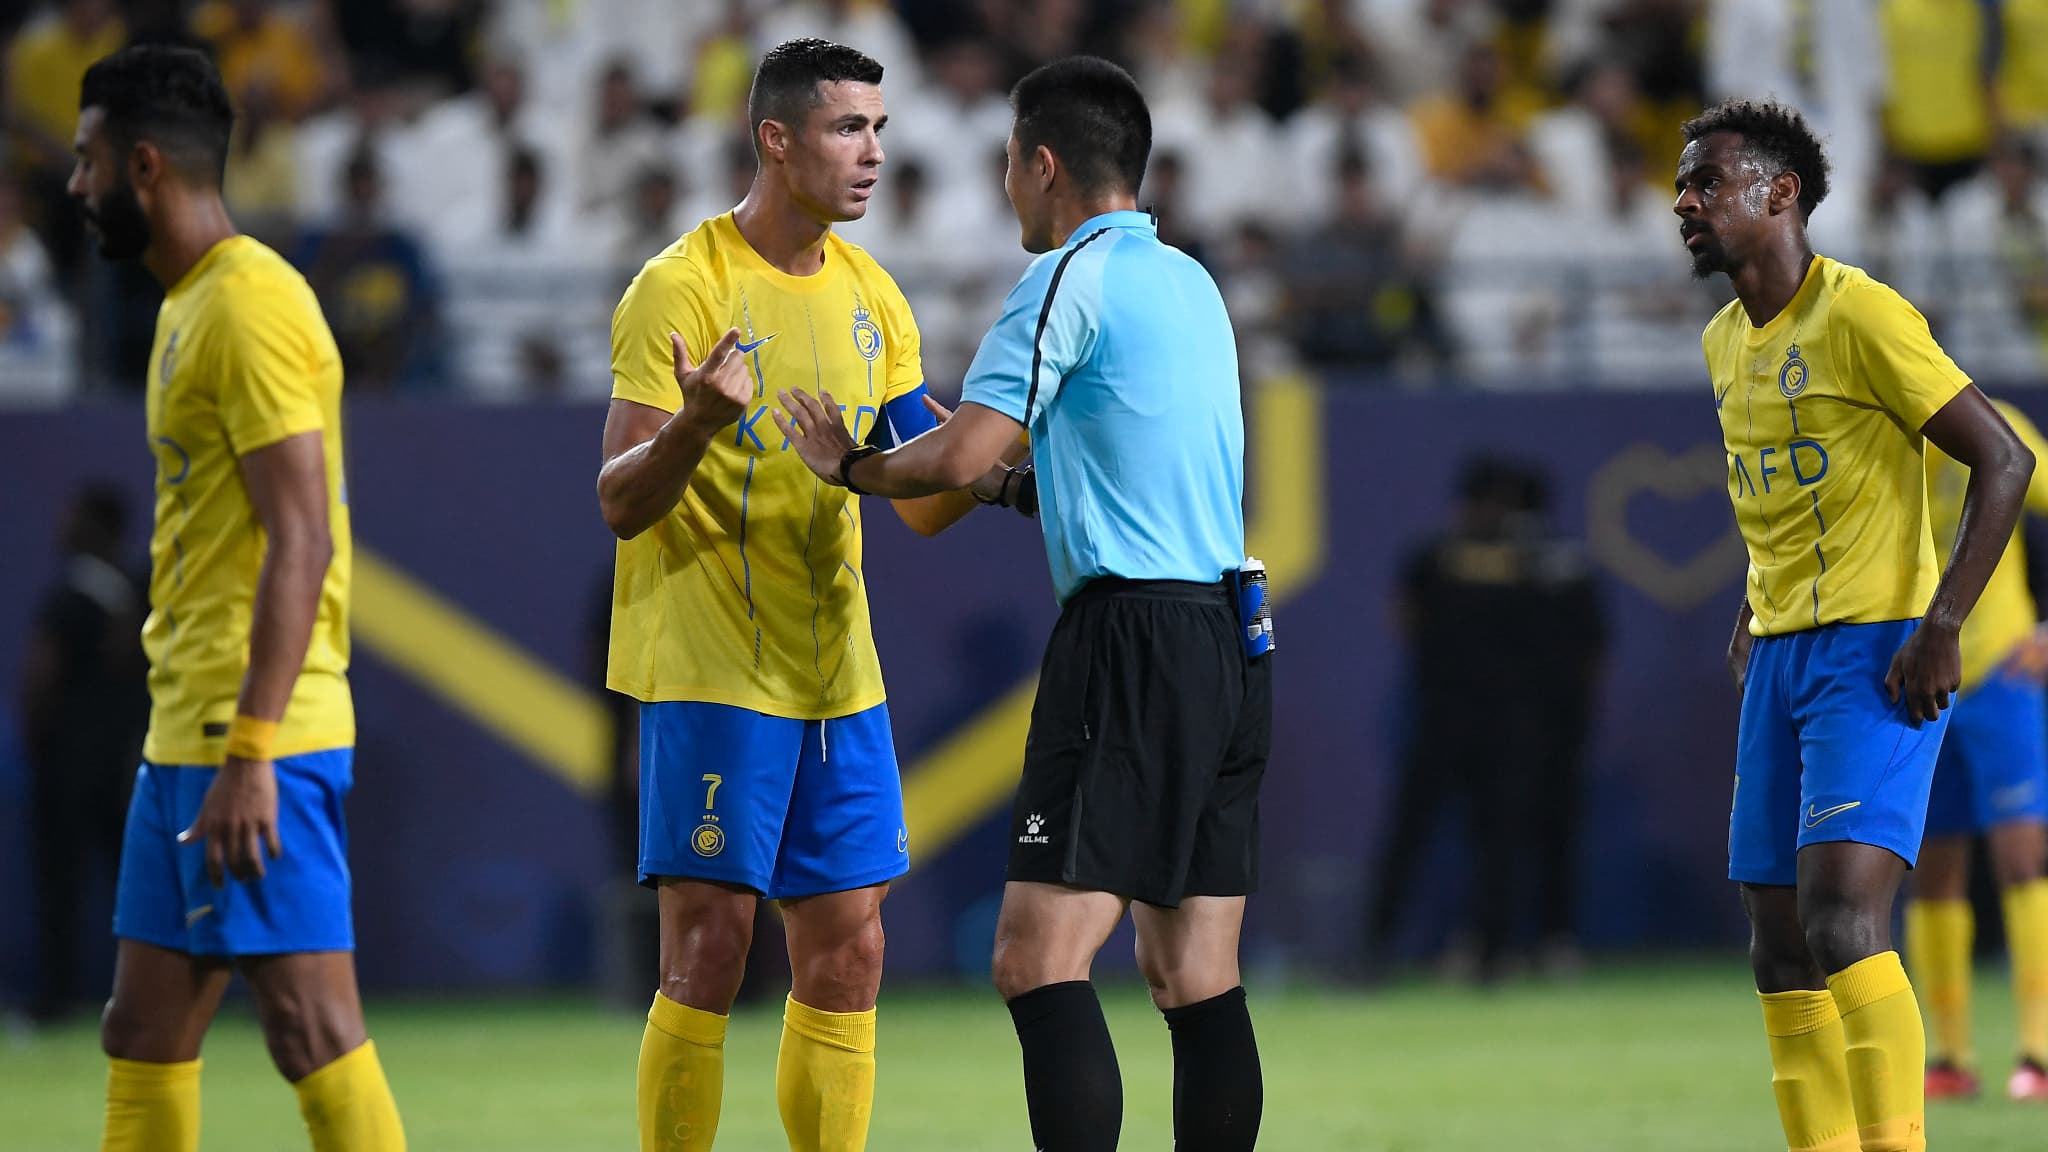 Al-Nassr pulled off a hard-fought victory over Shabab Al Ahli, a club from the United Arab Emirates, in the Asian Champions League qualifying final. After trailing 1-2 until the 88th minute, Al-Nassr finally beat Shabab Al Ahli 4-2 to secure their spot in the group stage.